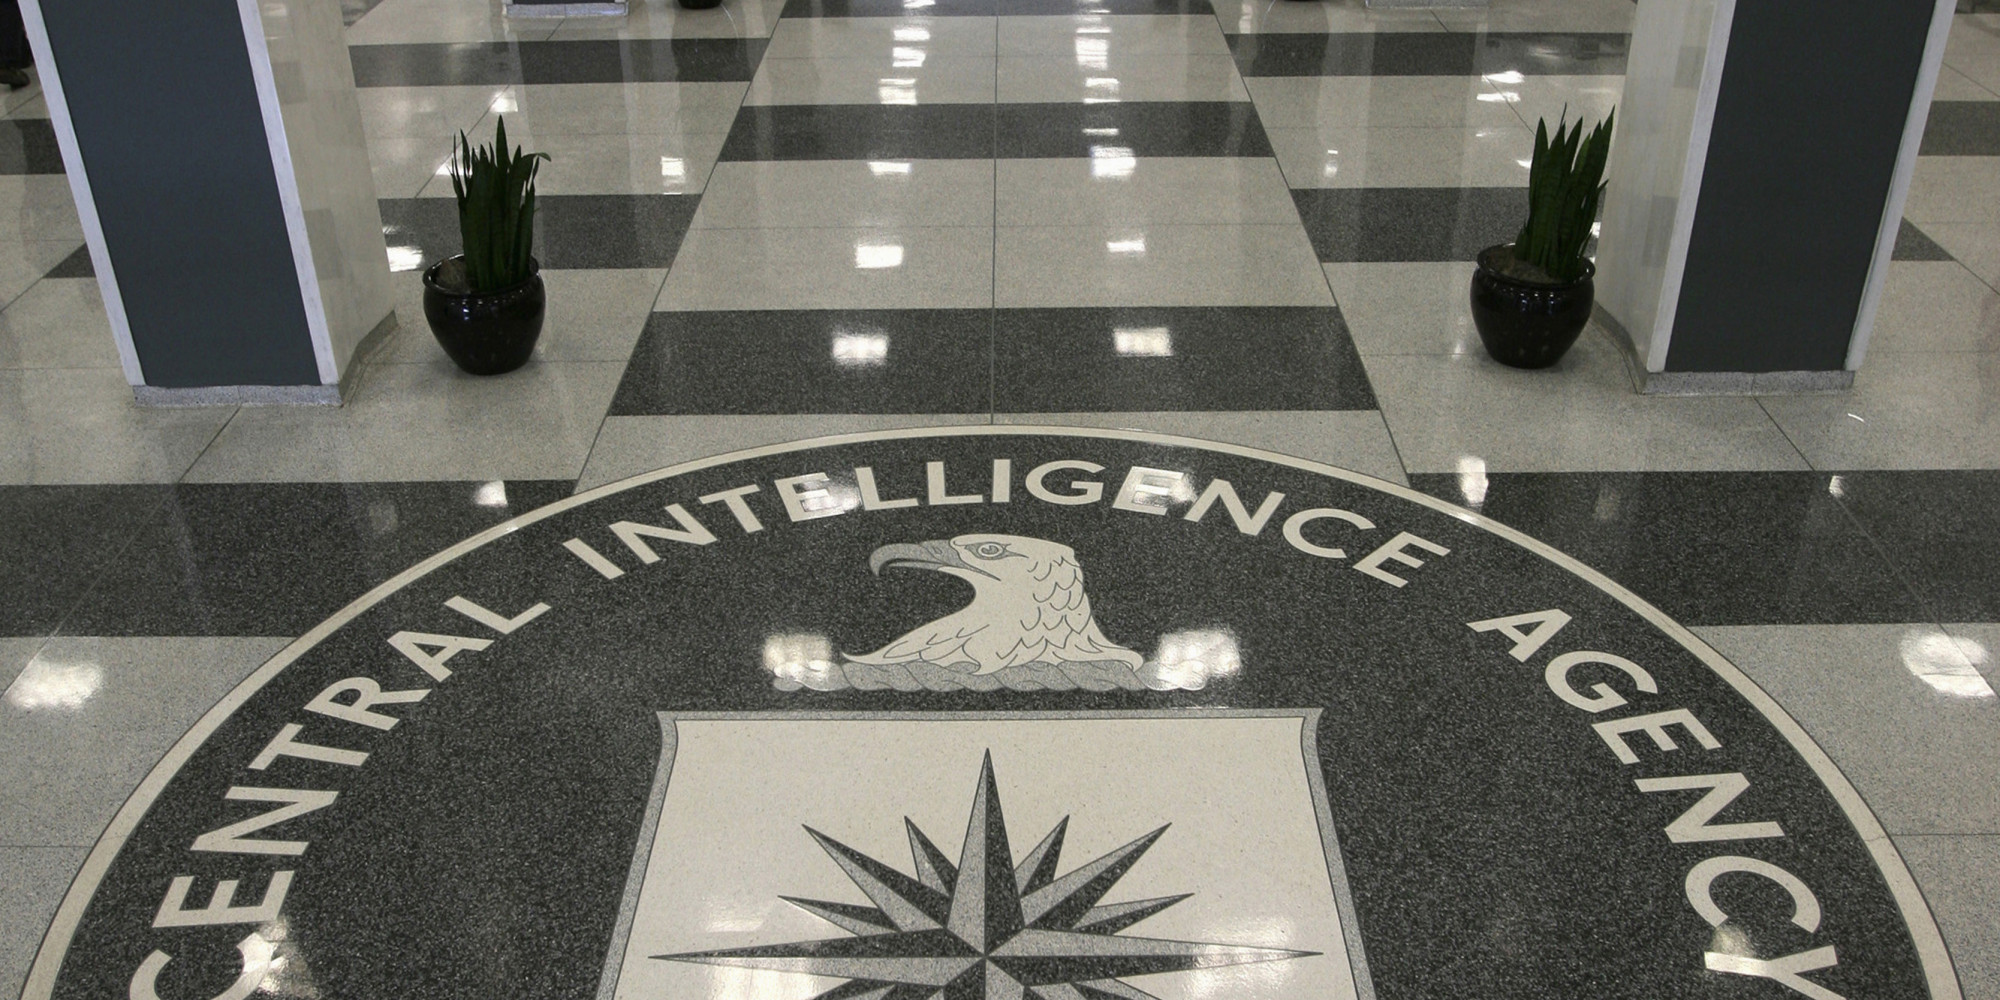 AT&T Subscribers, The CIA Has Your Phone Records